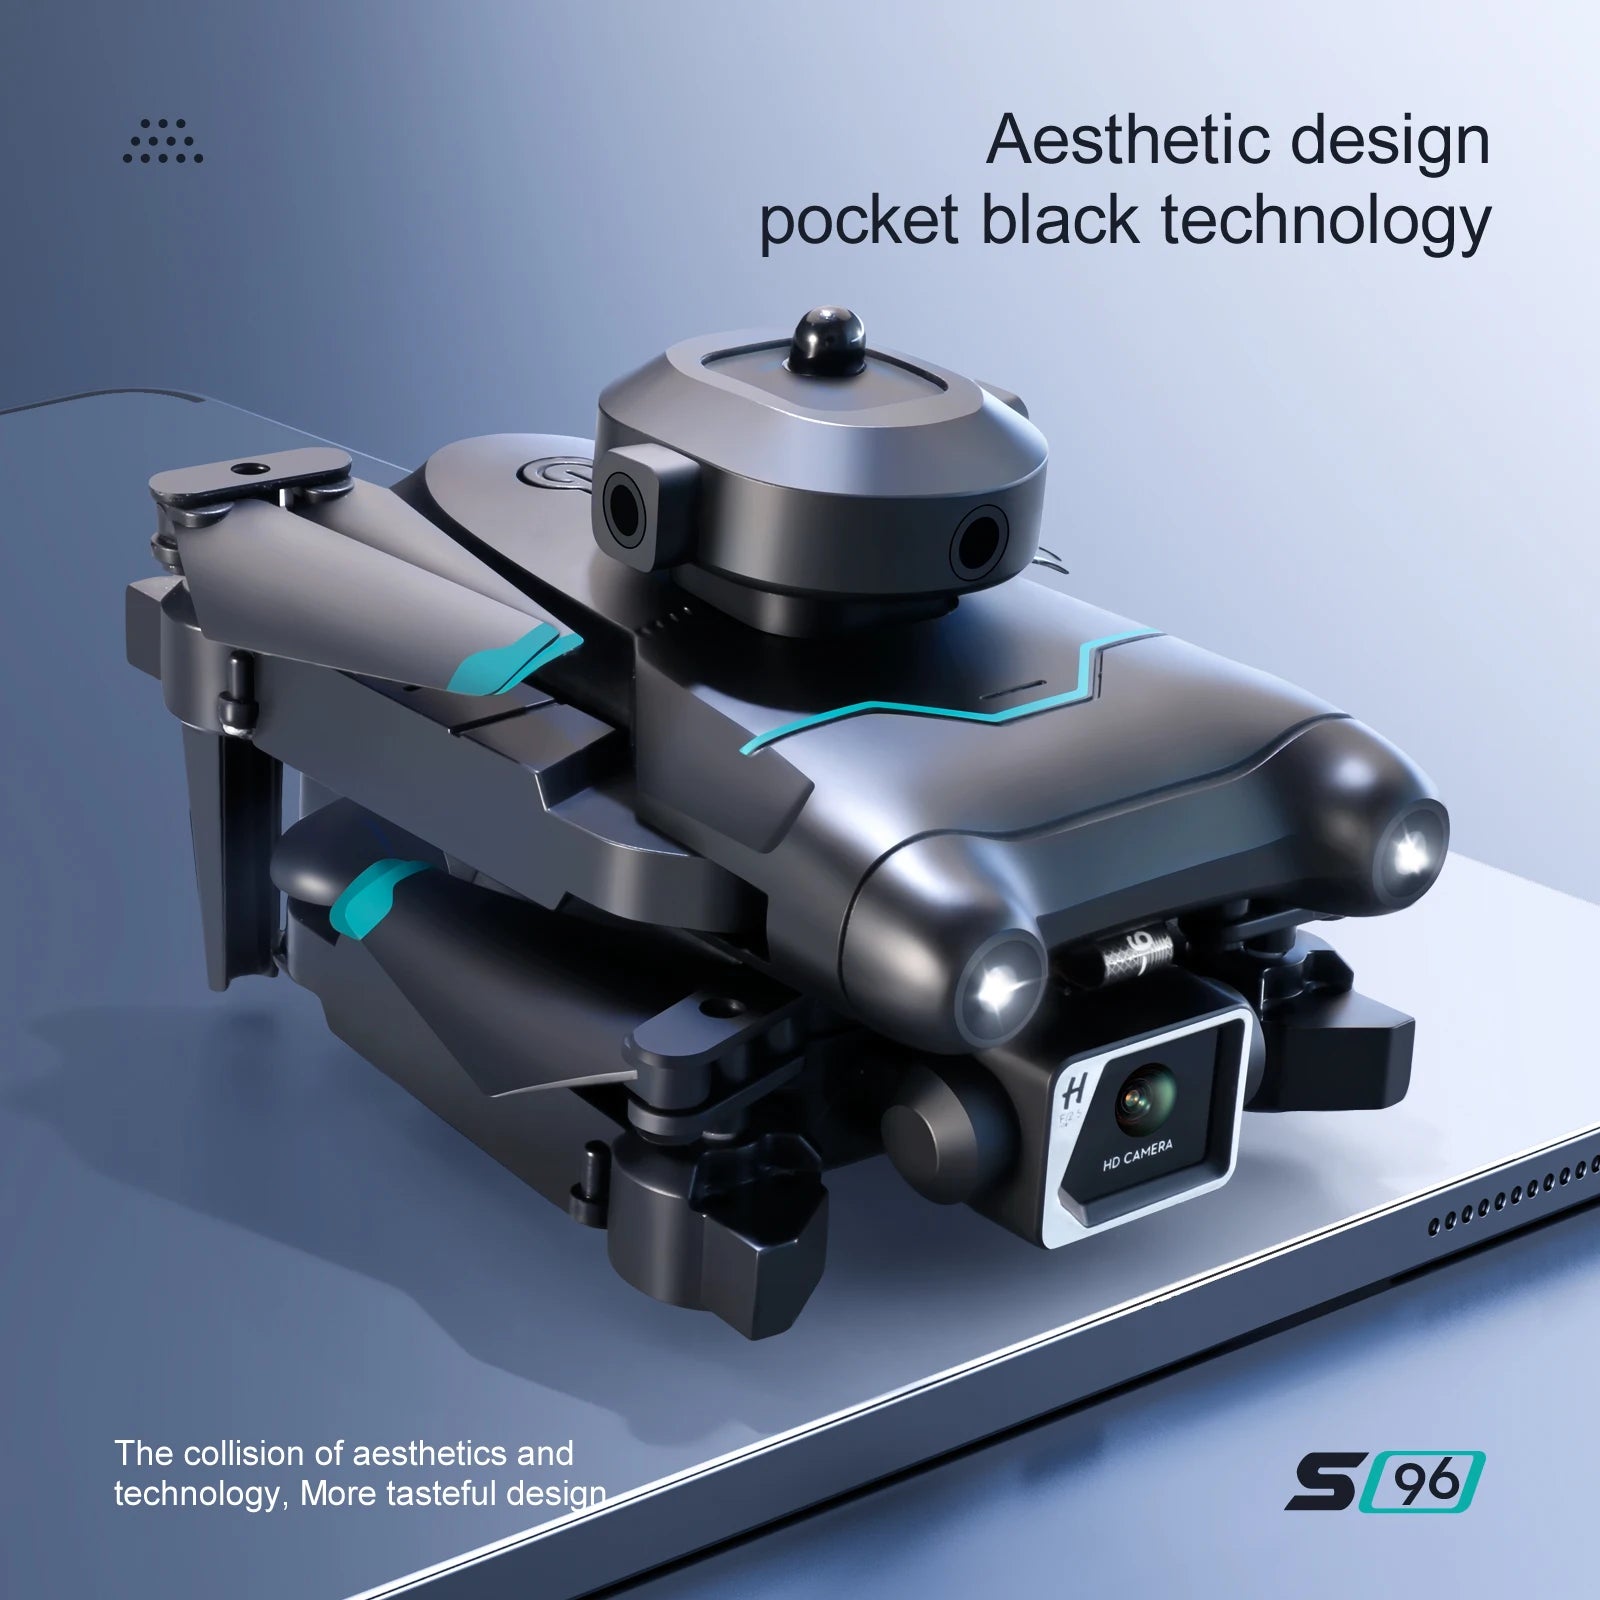 pocket black technology hd the collision of aesthetics and technology 